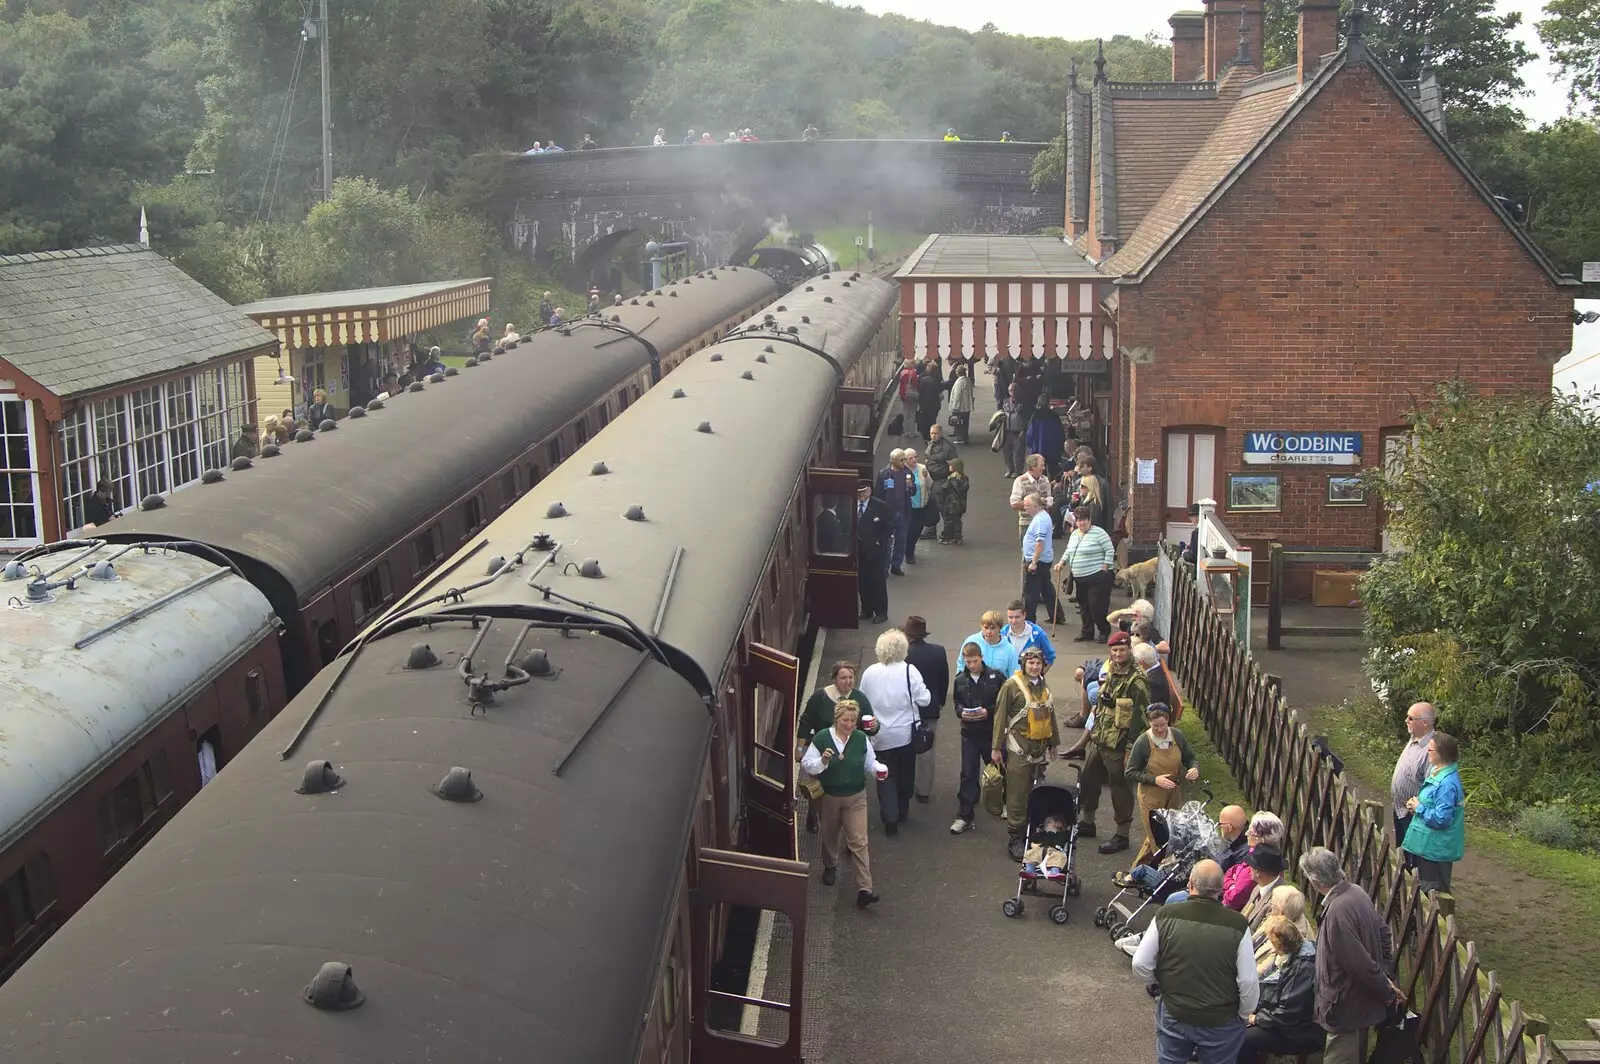 A crowded station, from A 1940s Steam Weekend, Holt and Sheringham, Norfolk - 18th September 2010